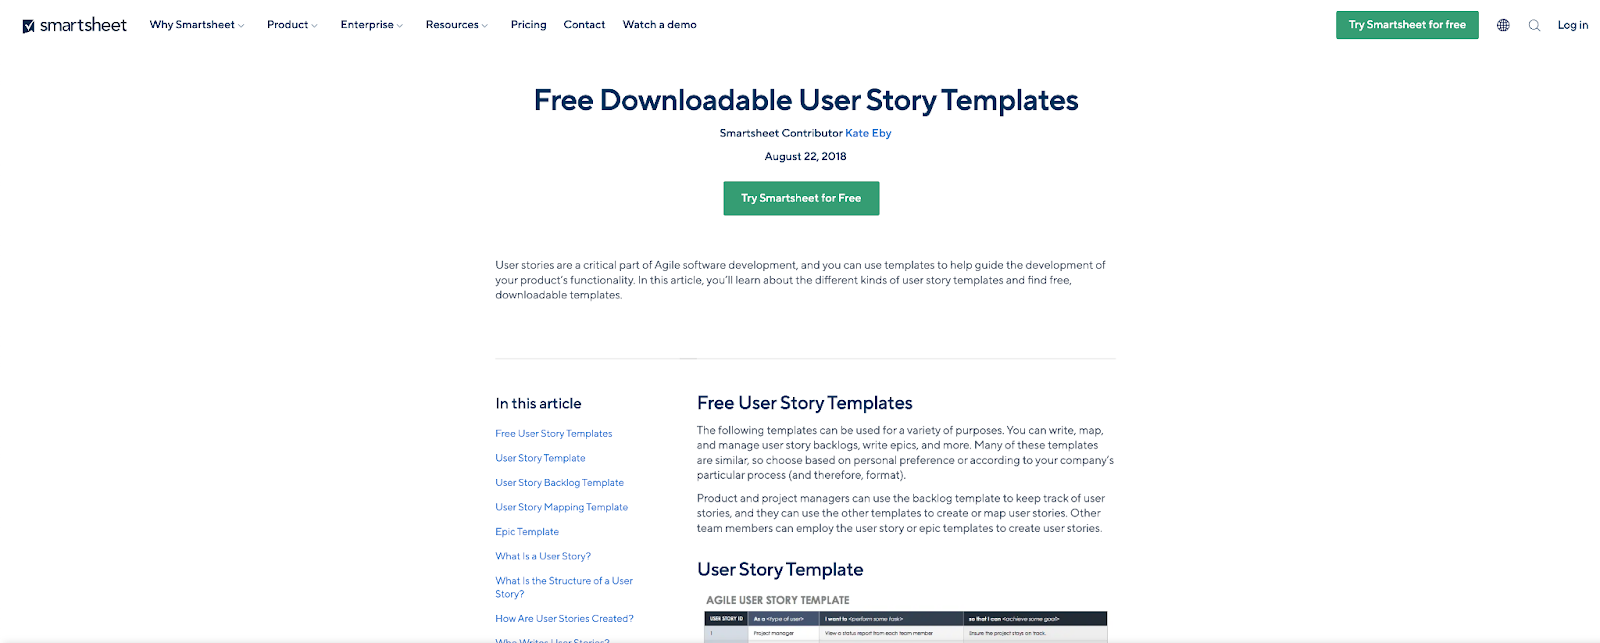 Try these free user story templates if your team happens to use Smartsheet to manage your projects